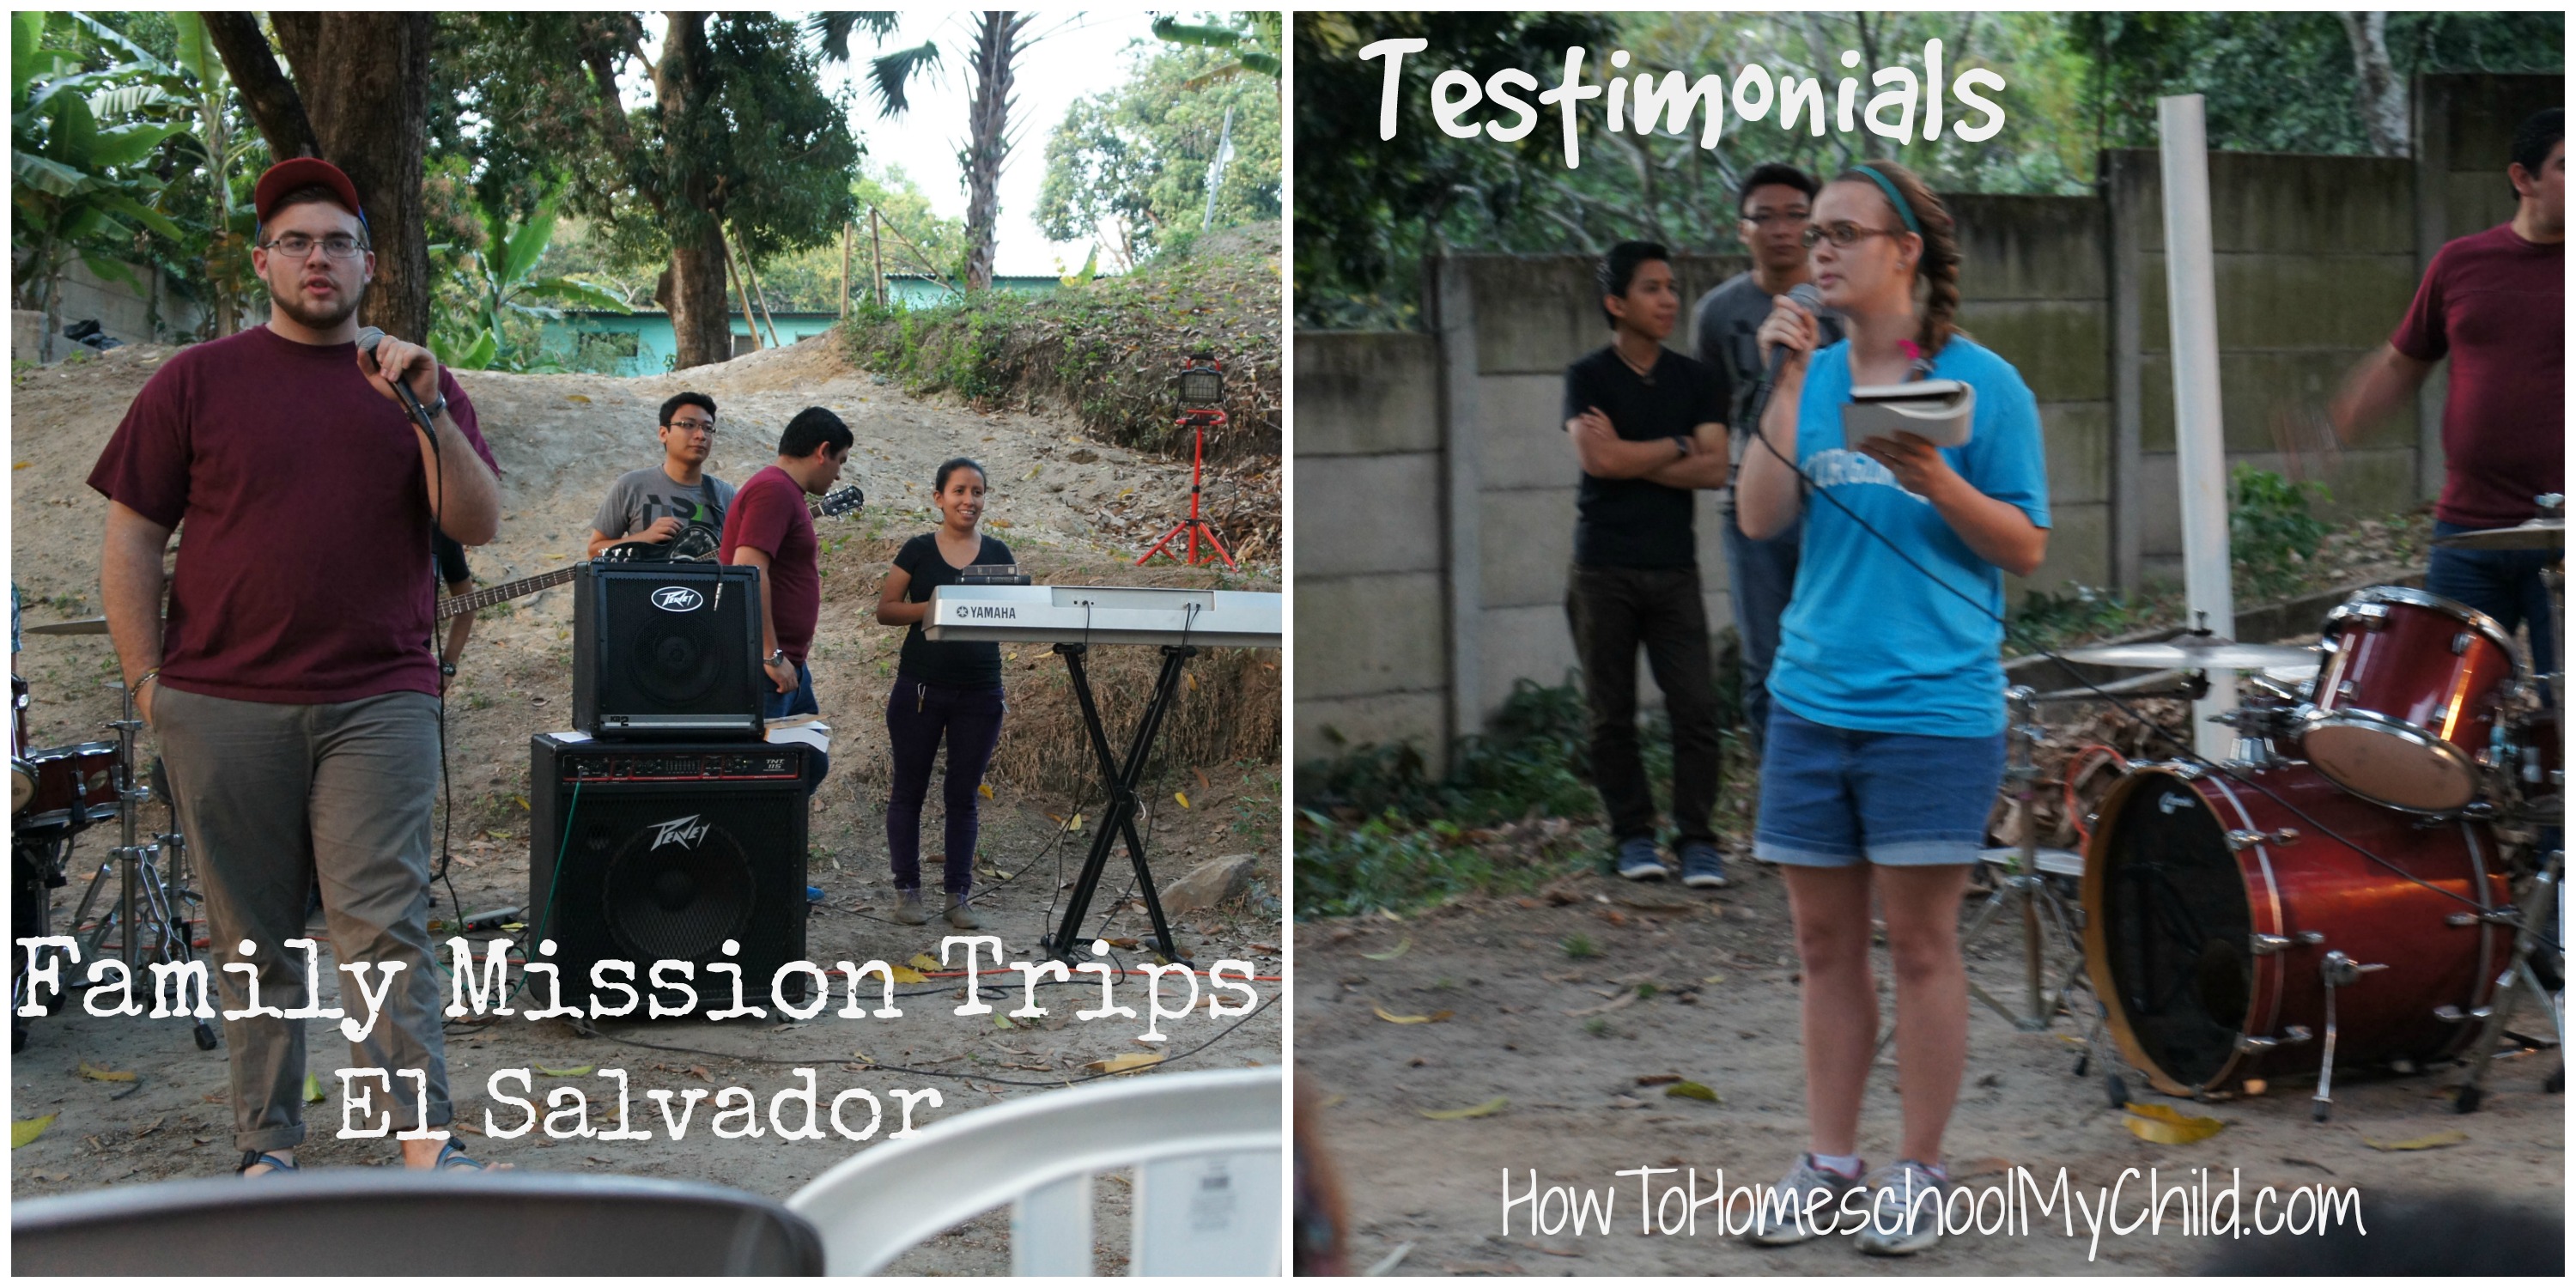 Testimonies during our Outreach of our Family Mission Trips ~ from HowToHomeschoolMyChild.com